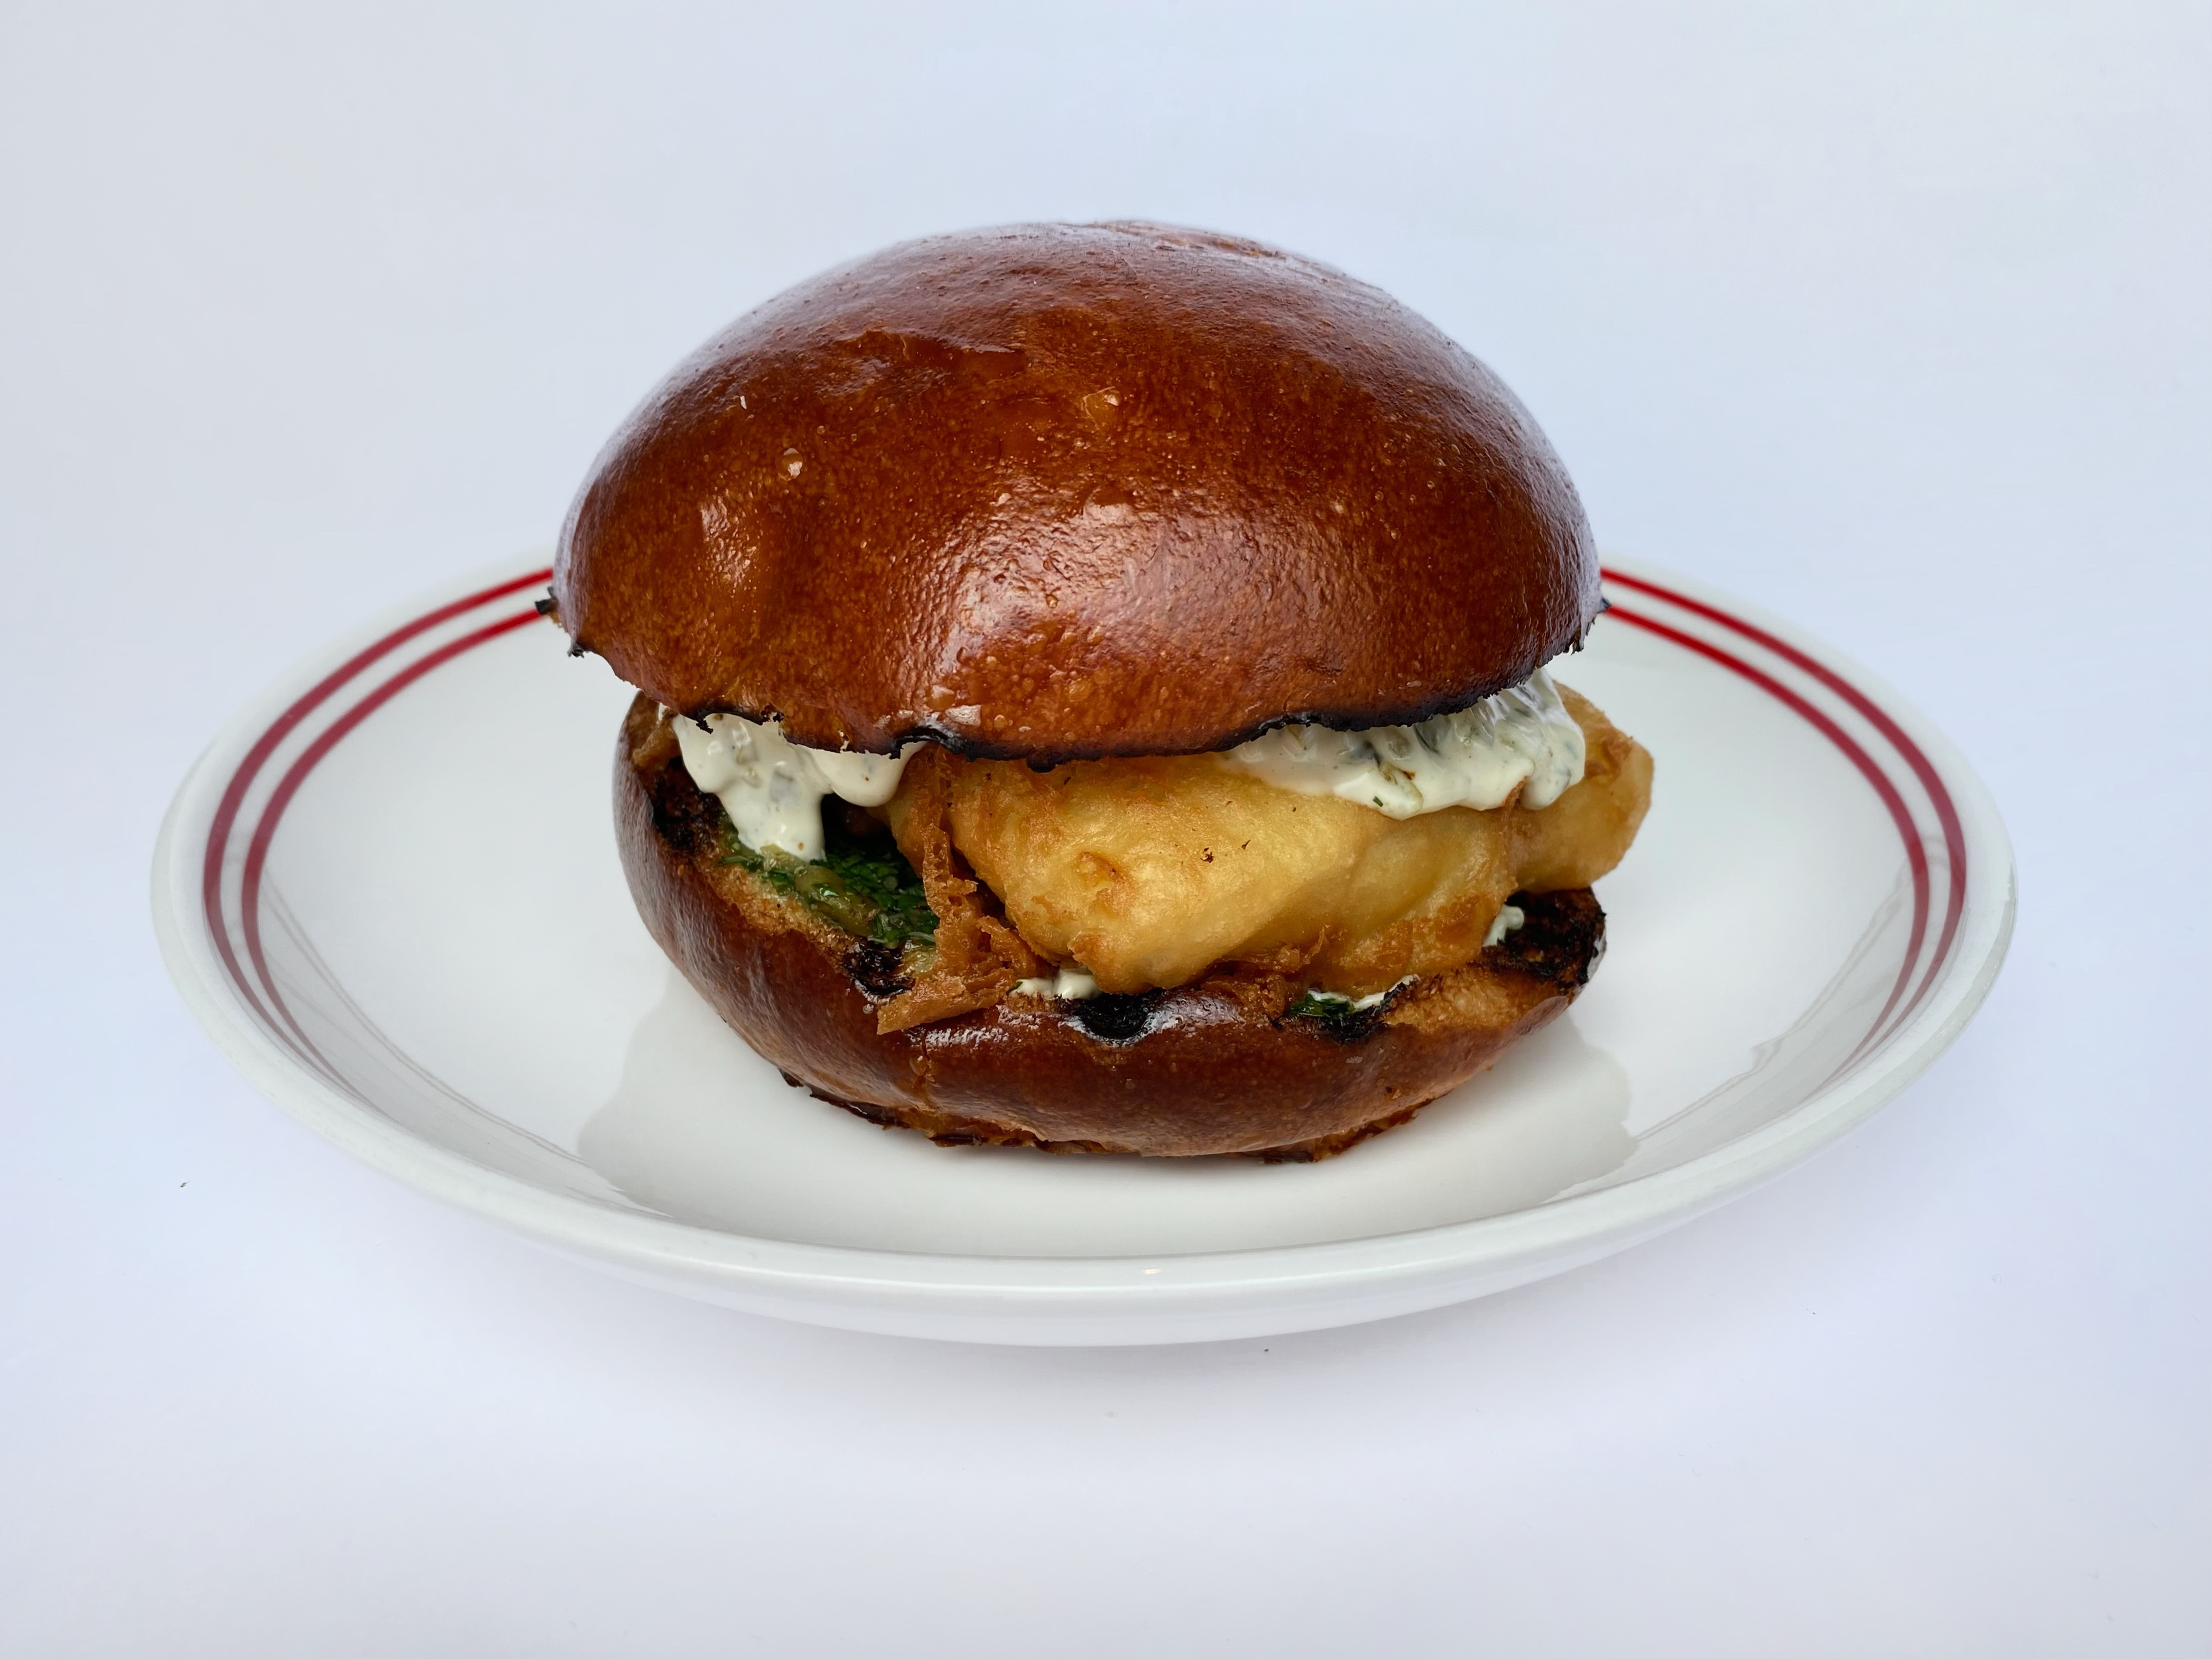 Fish burger with battered cod, brioche bun, red onion and tartar and salsa verde sauces<br>